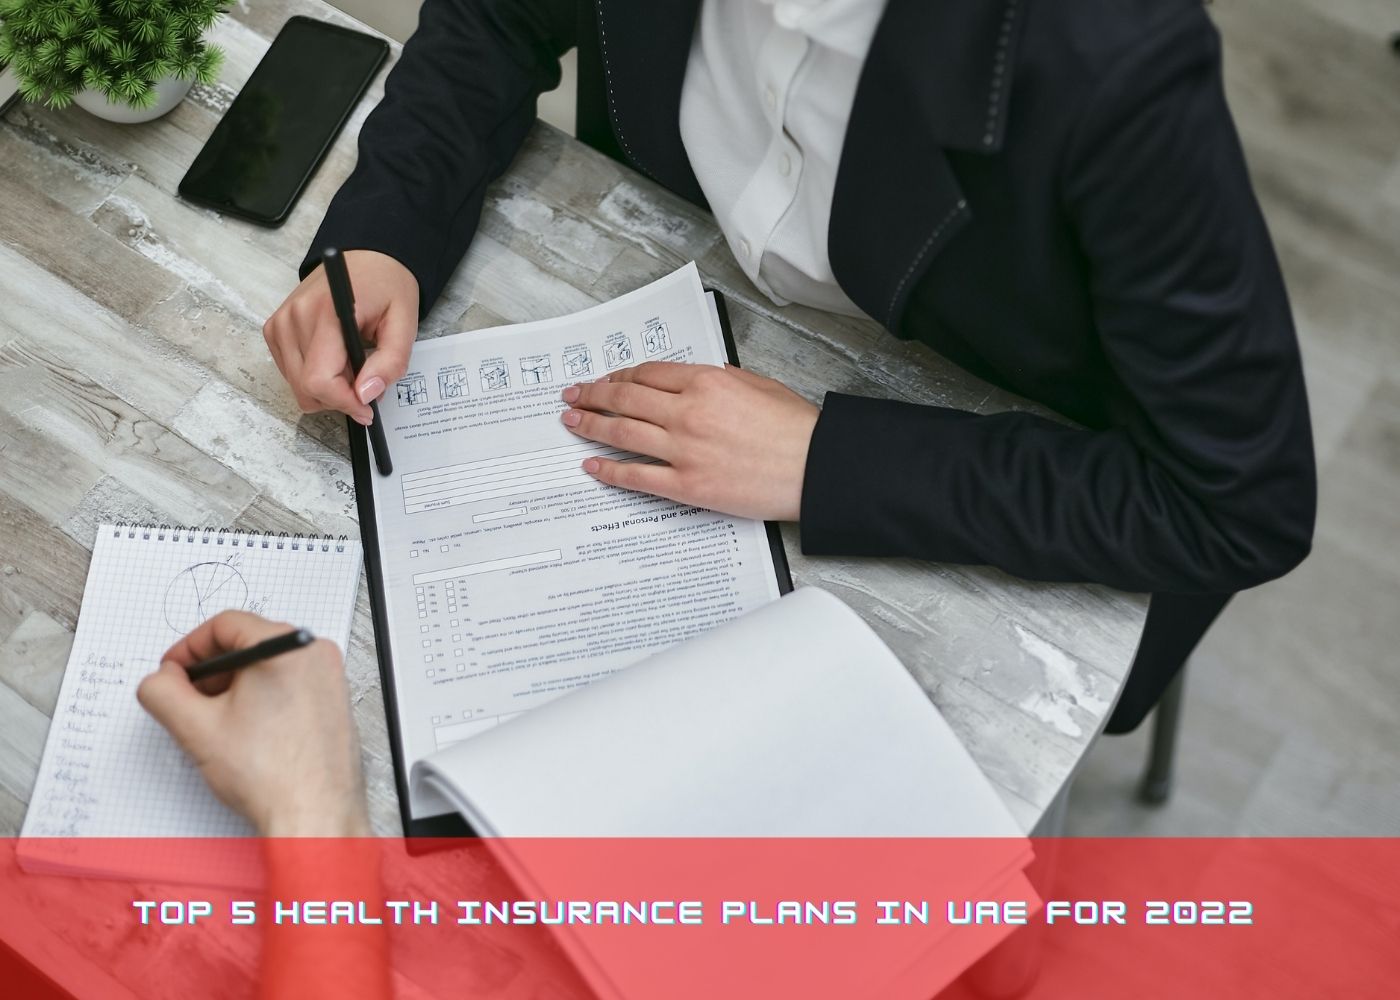 Top 5 Health Insurance Plans in UAE for 2022 